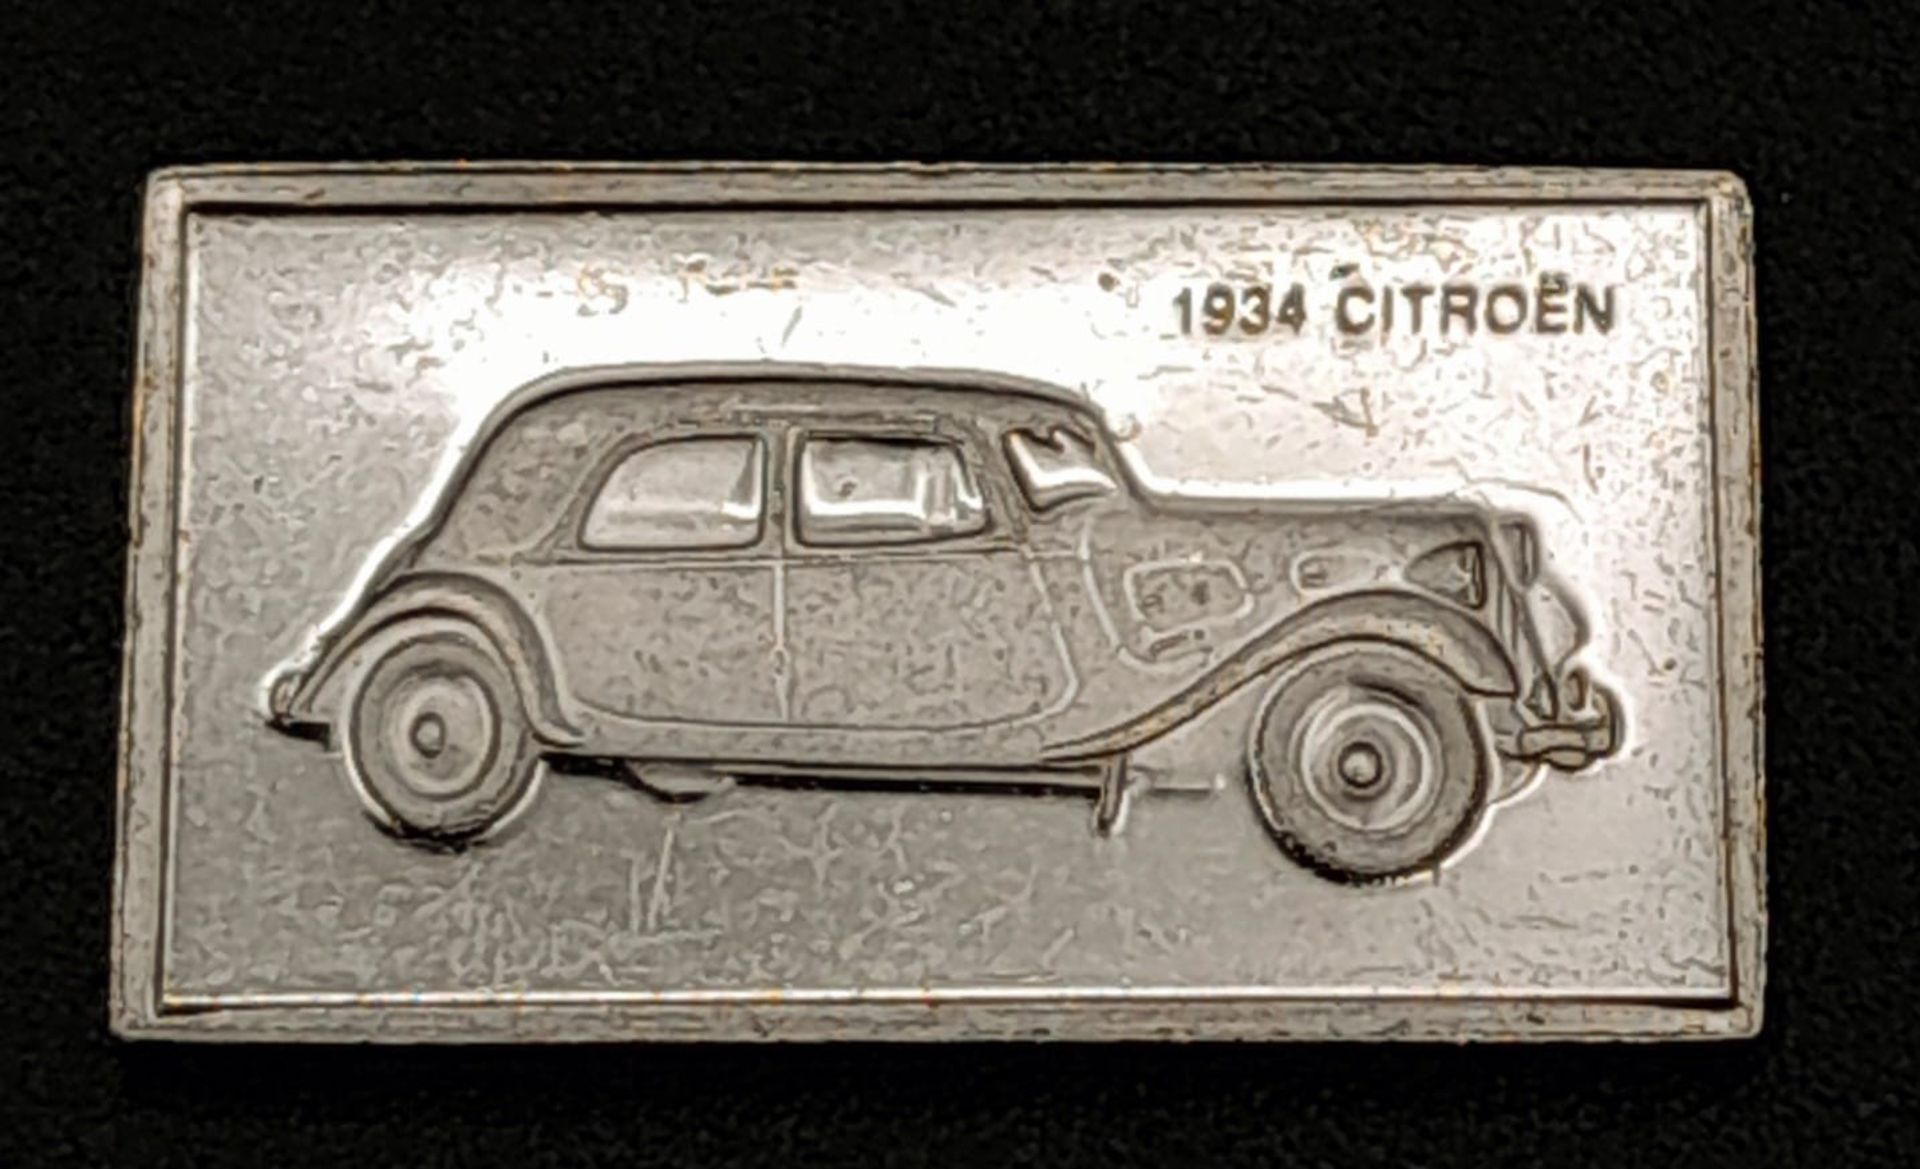 2 X STERLING SILVER AND ENAMEL FRENCH CITROEN CAR LOGO MANUFACTURER PLAQUES, WEIGHT TOTAL 24.8G, - Image 3 of 4